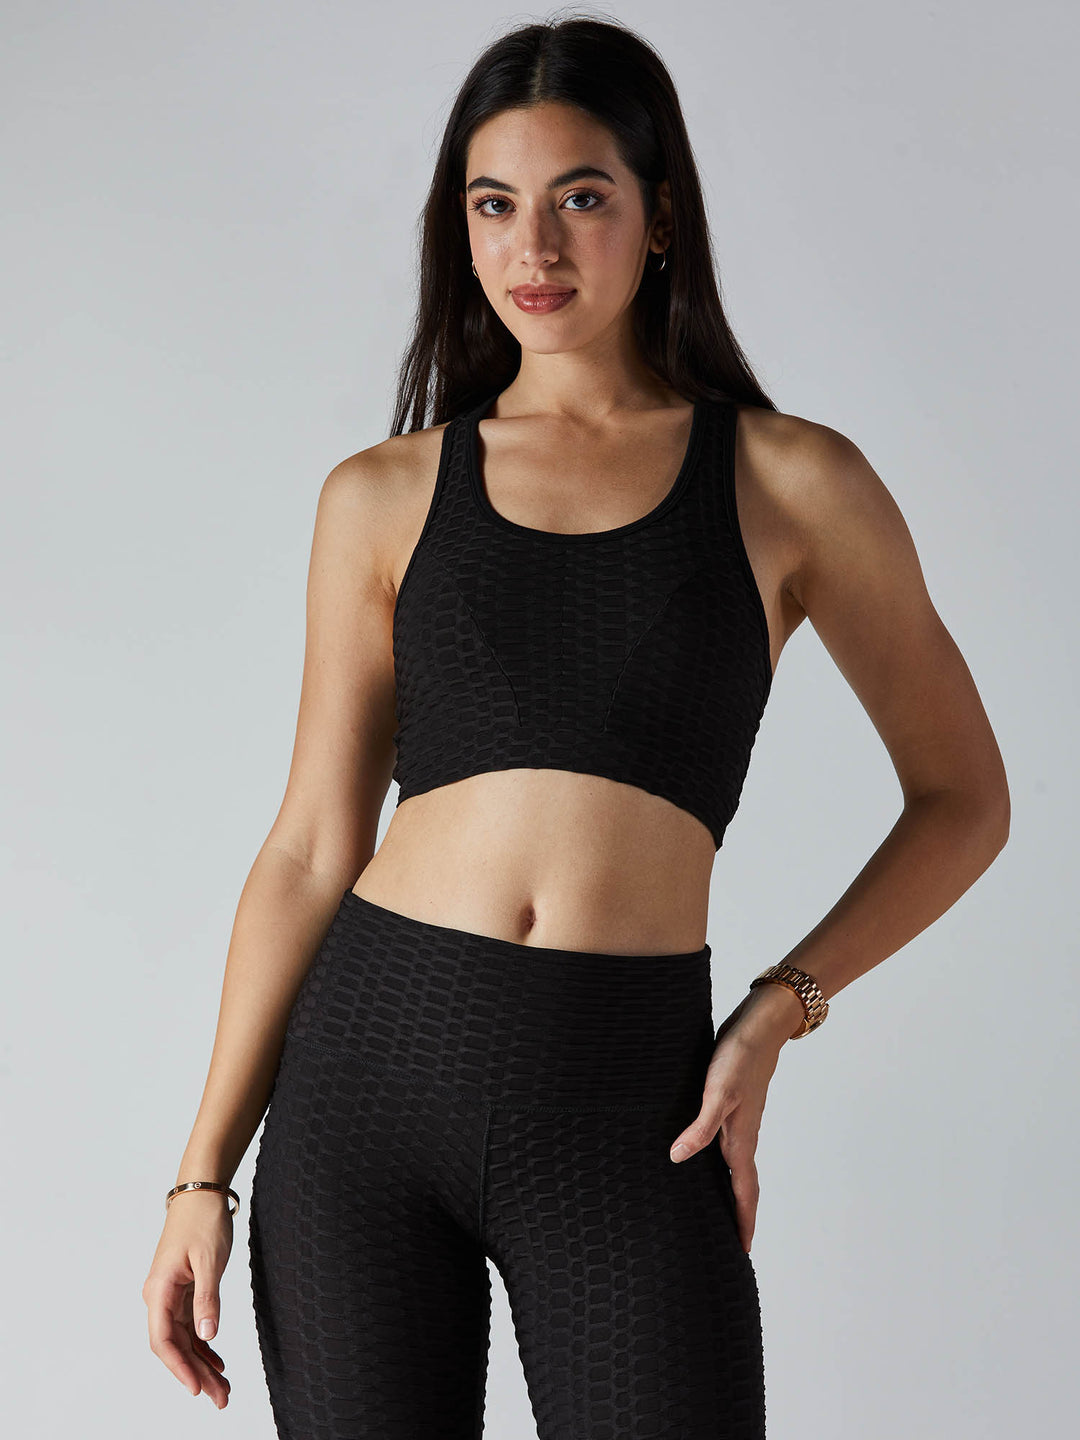 Buy Cava Athleisure Solid Black Snatched Leggings online